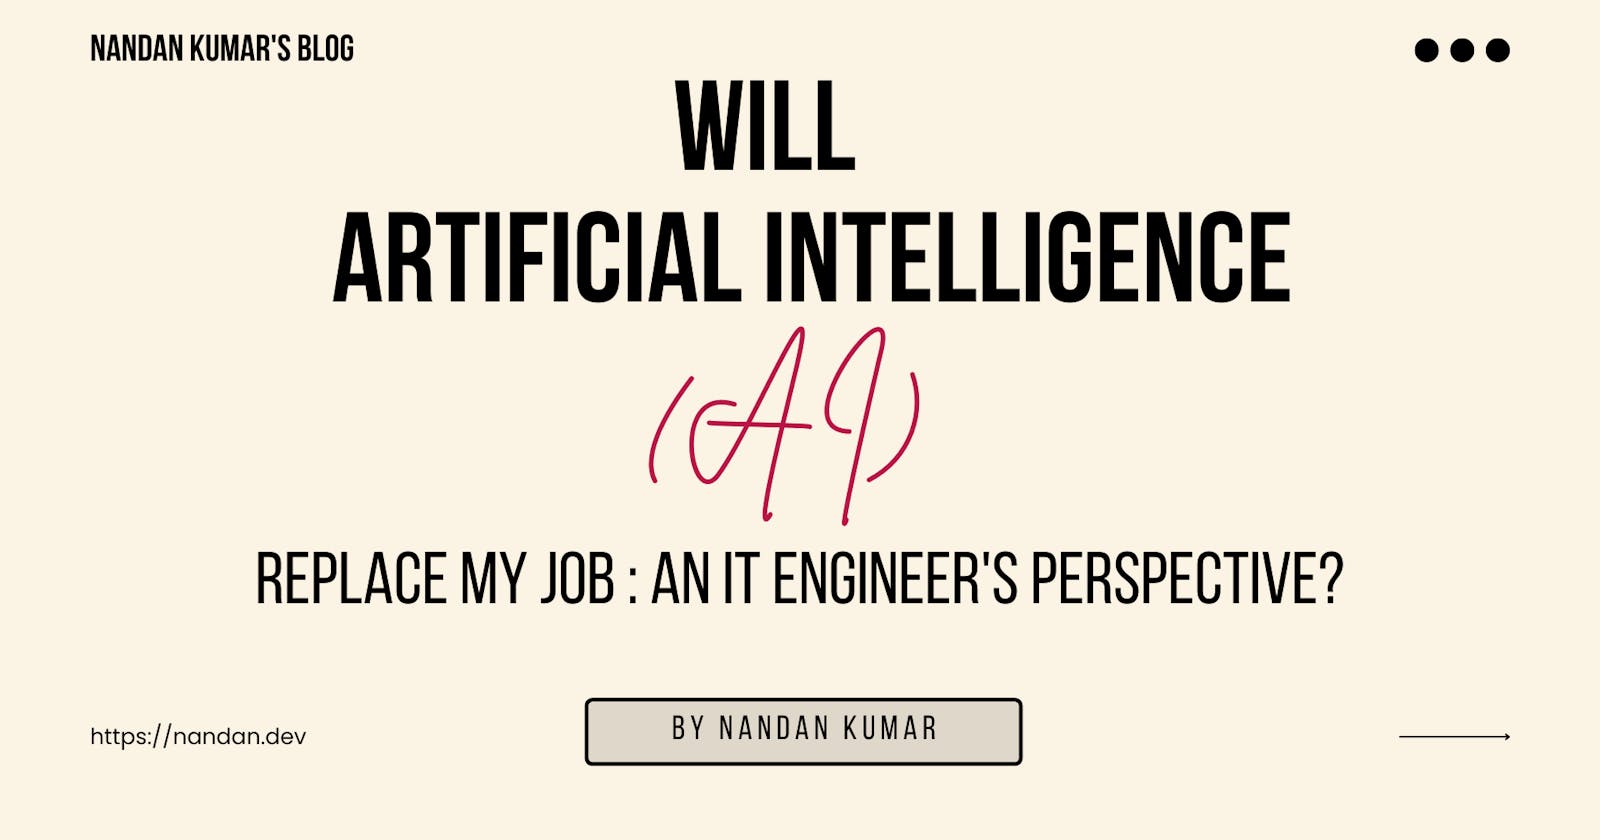 Will Artificial Intelligence(AI) replace my job: An IT Engineer's perspective?